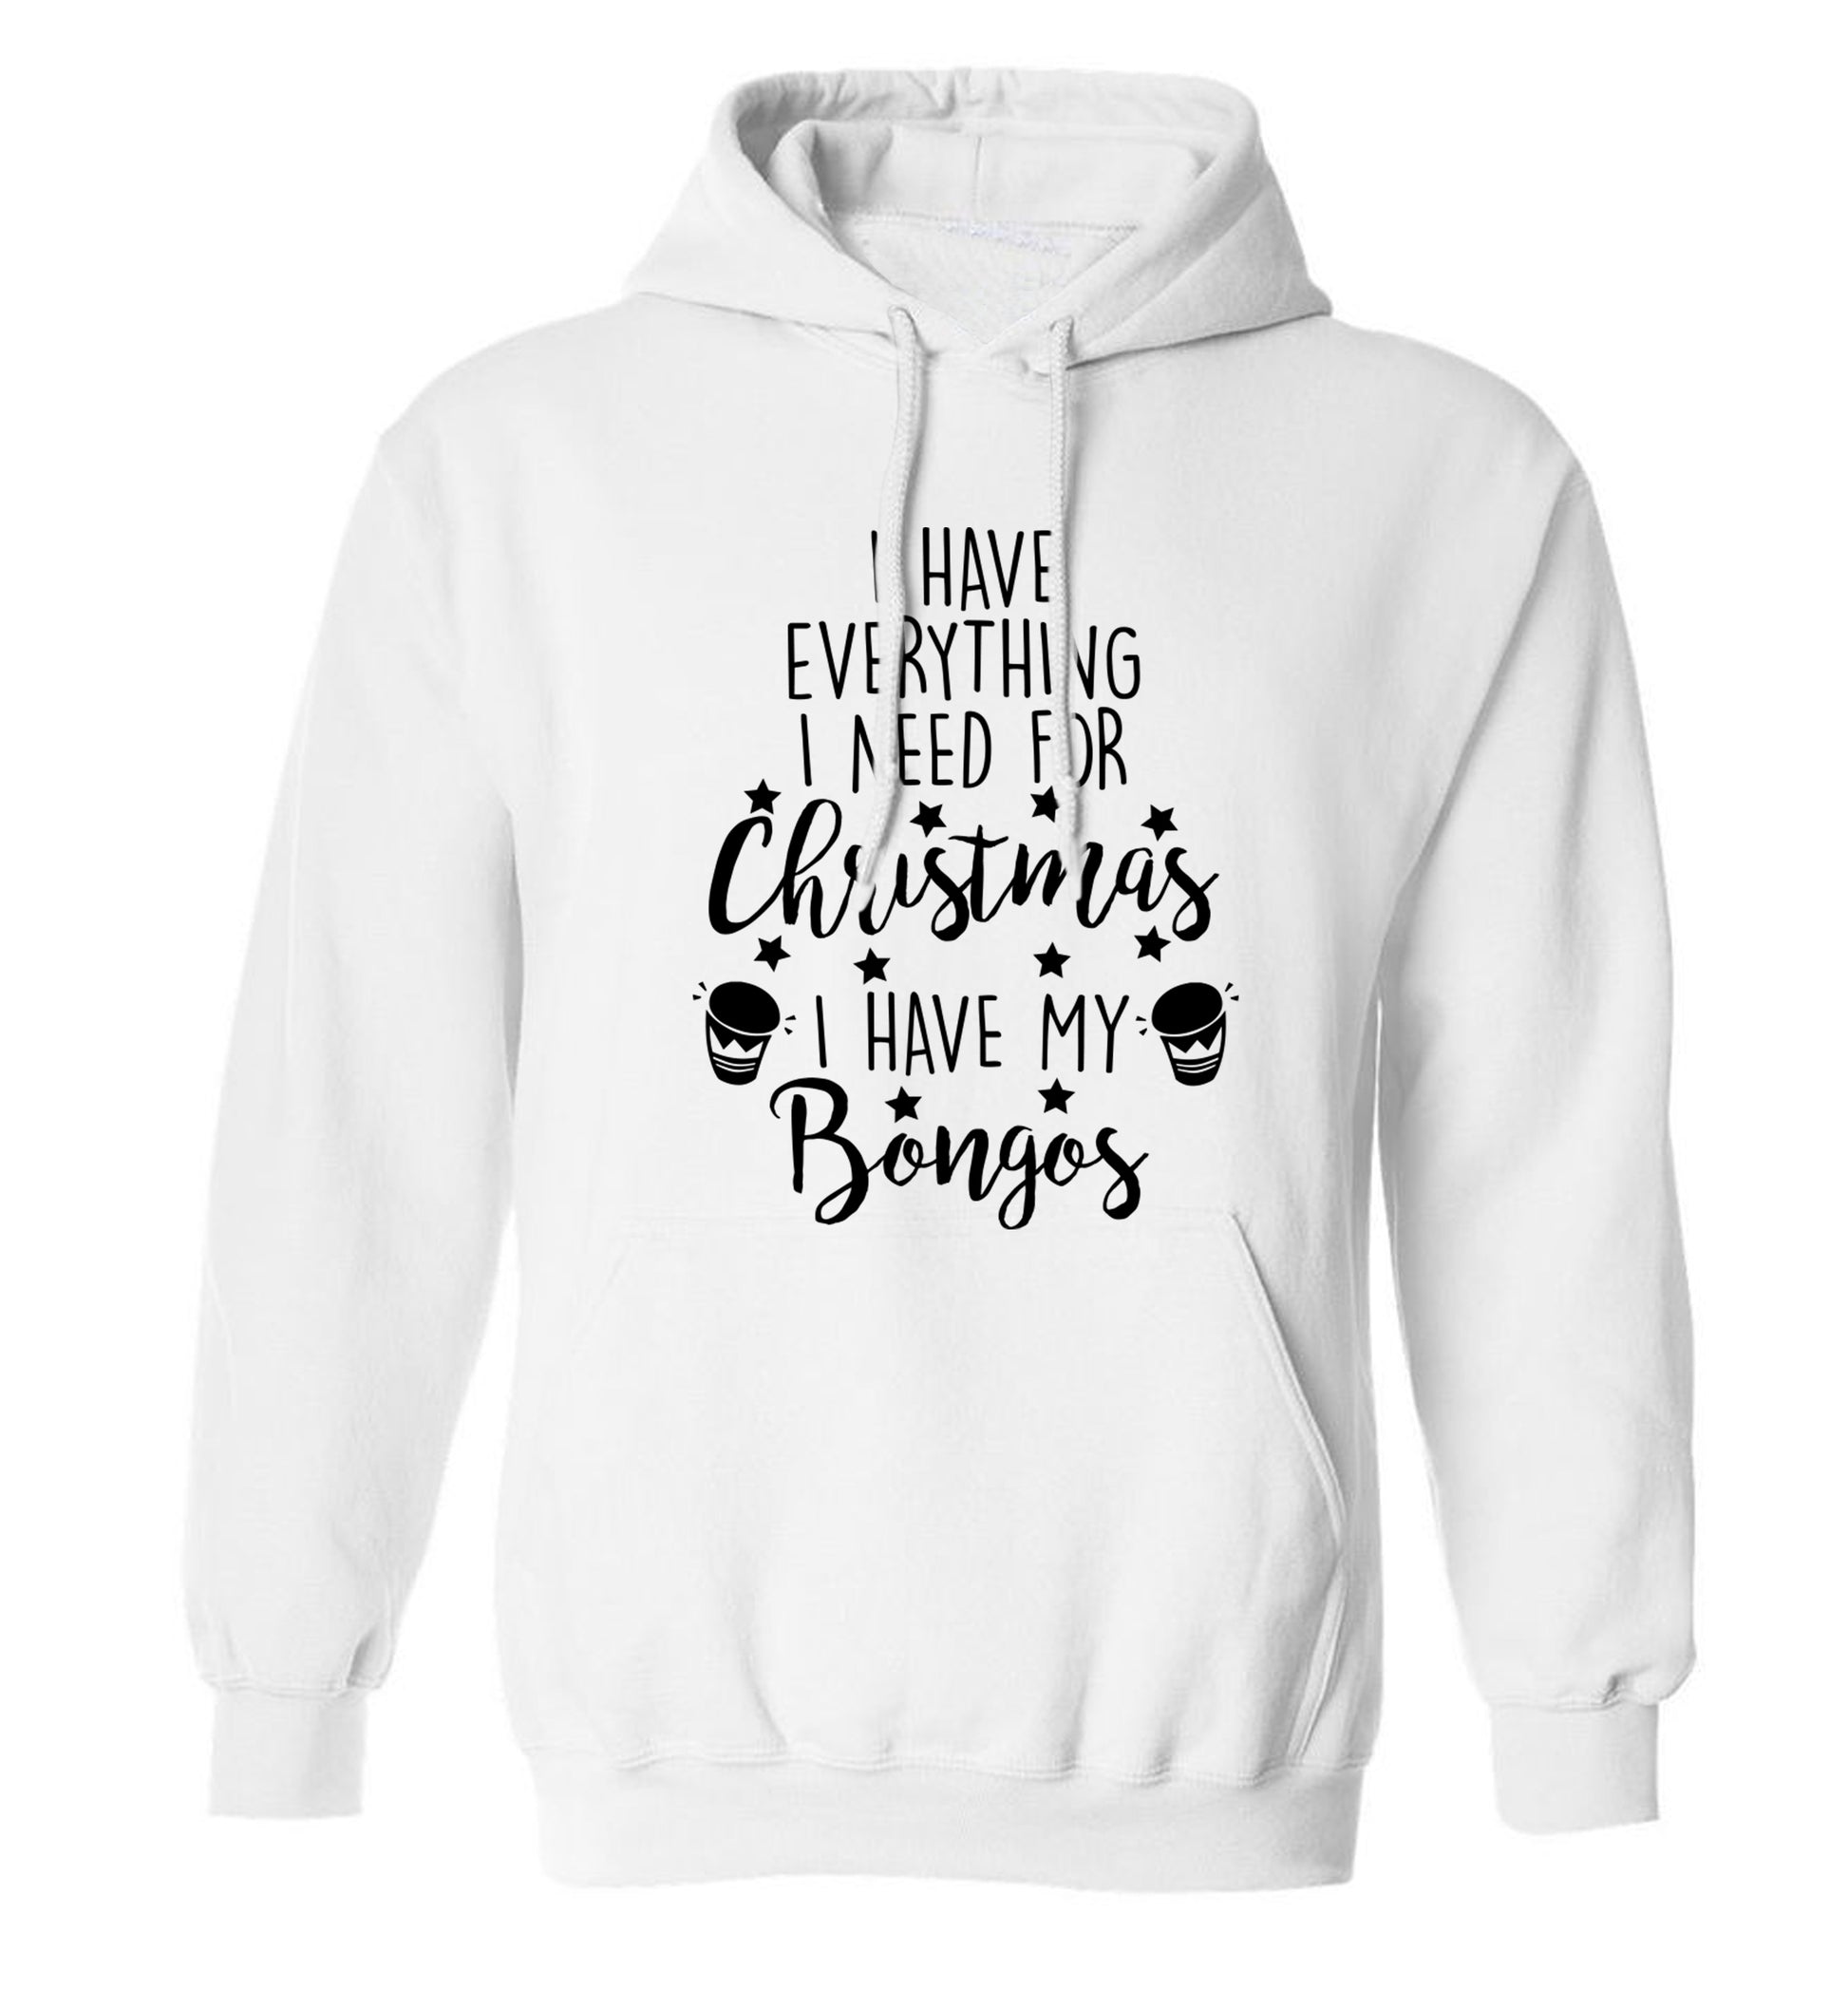 I have everything I need for Christmas I have my bongos! adults unisex white hoodie 2XL